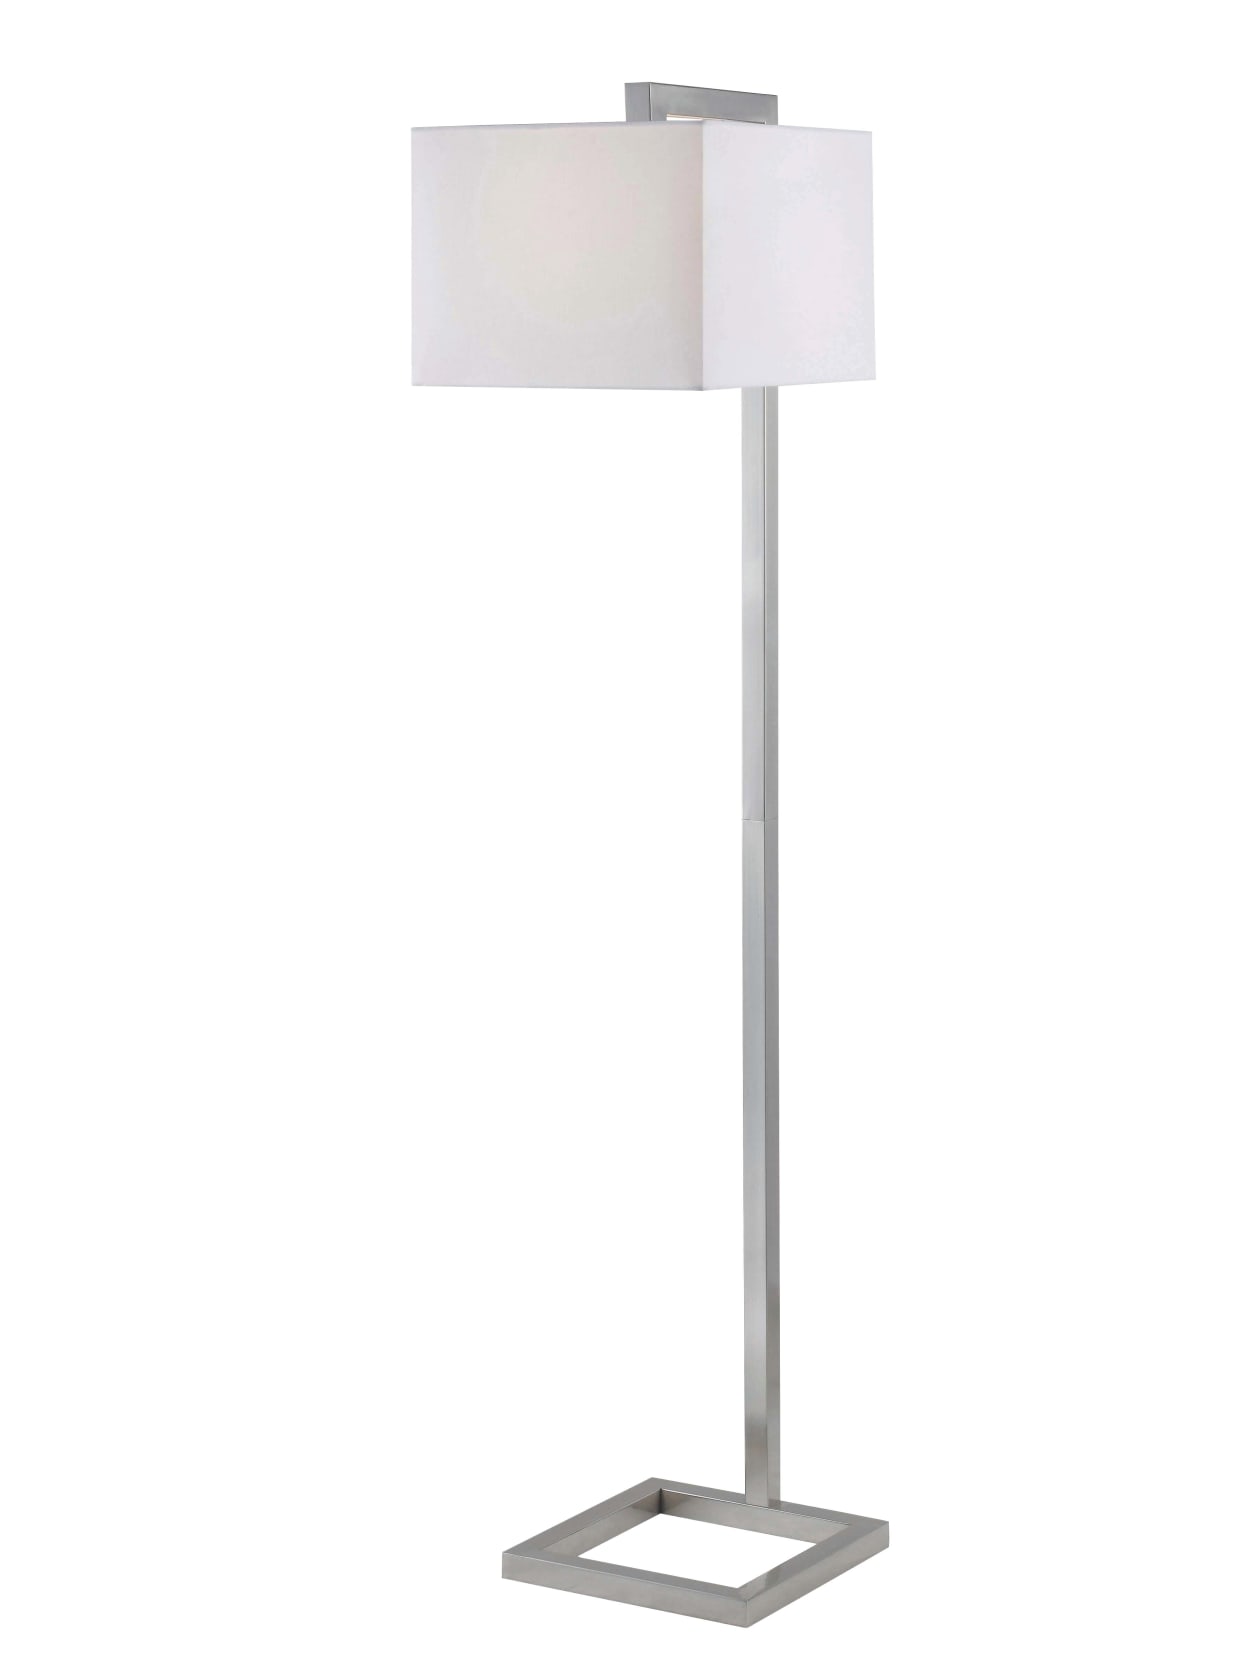 Square Floor Lamp : Modern Square Floor Lamp Steel With Reading Arm